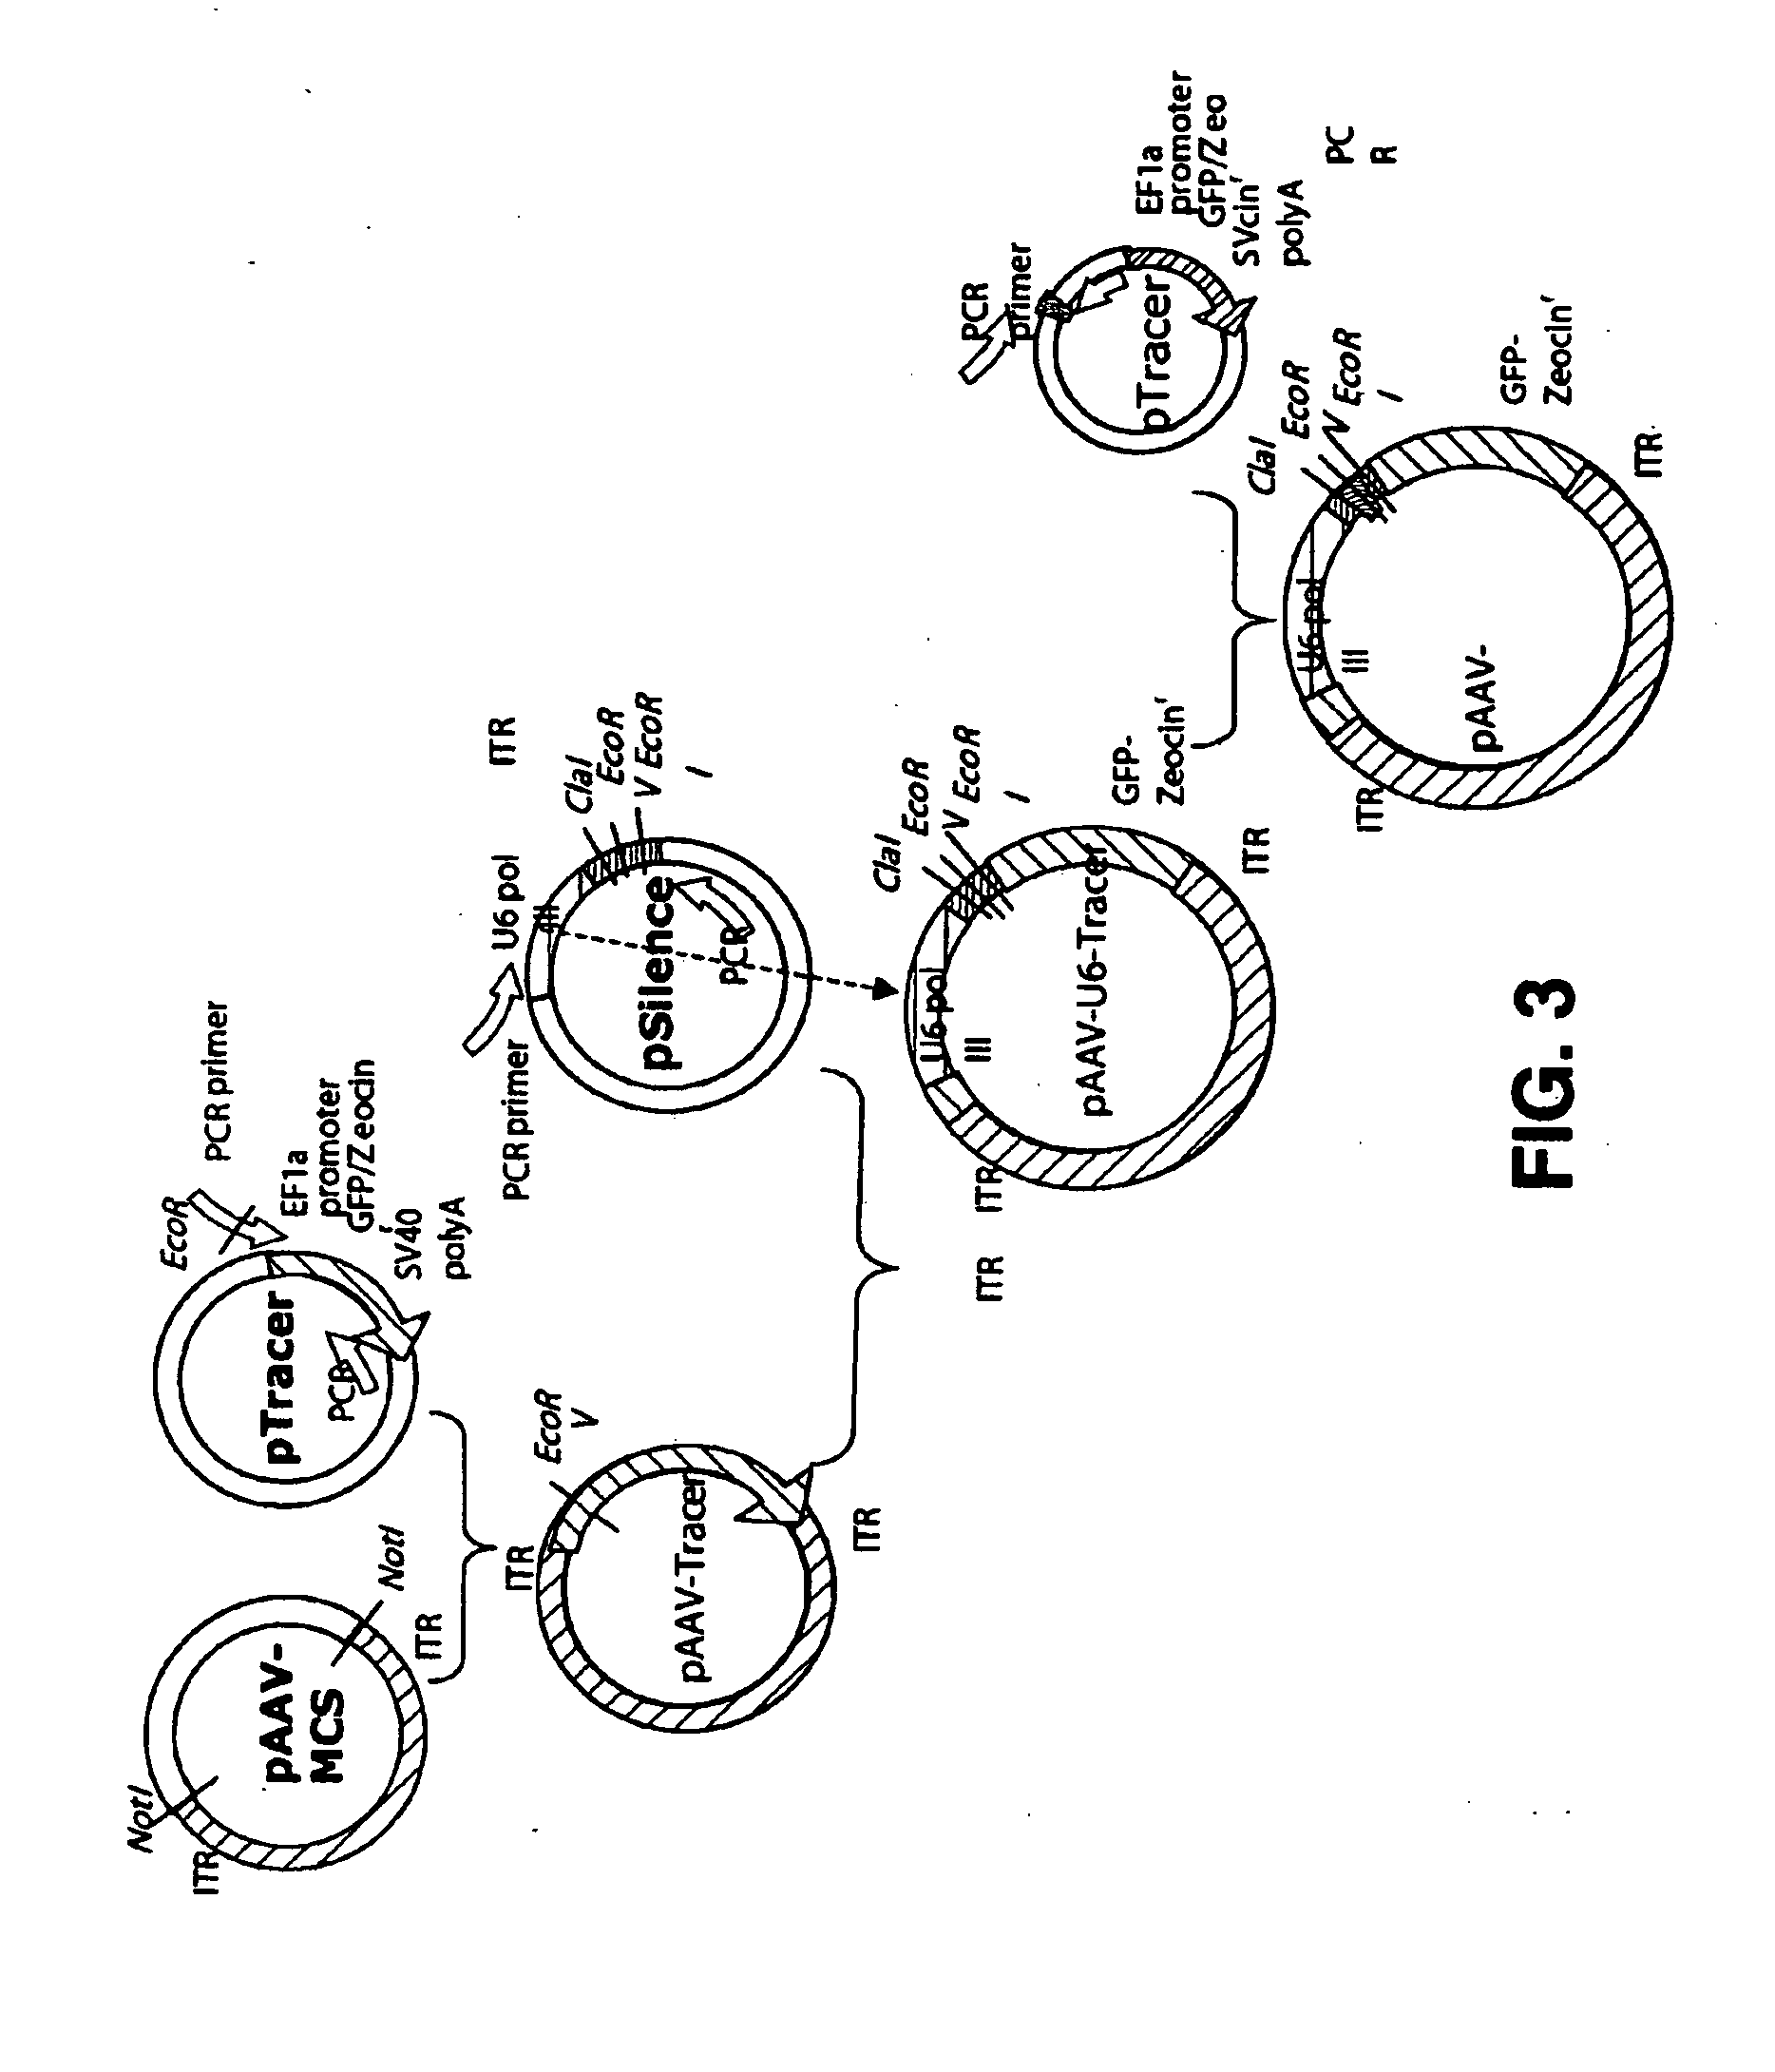 Compositions, devices and methods for treatment of huntington's disease through intracranial delivery of sirna